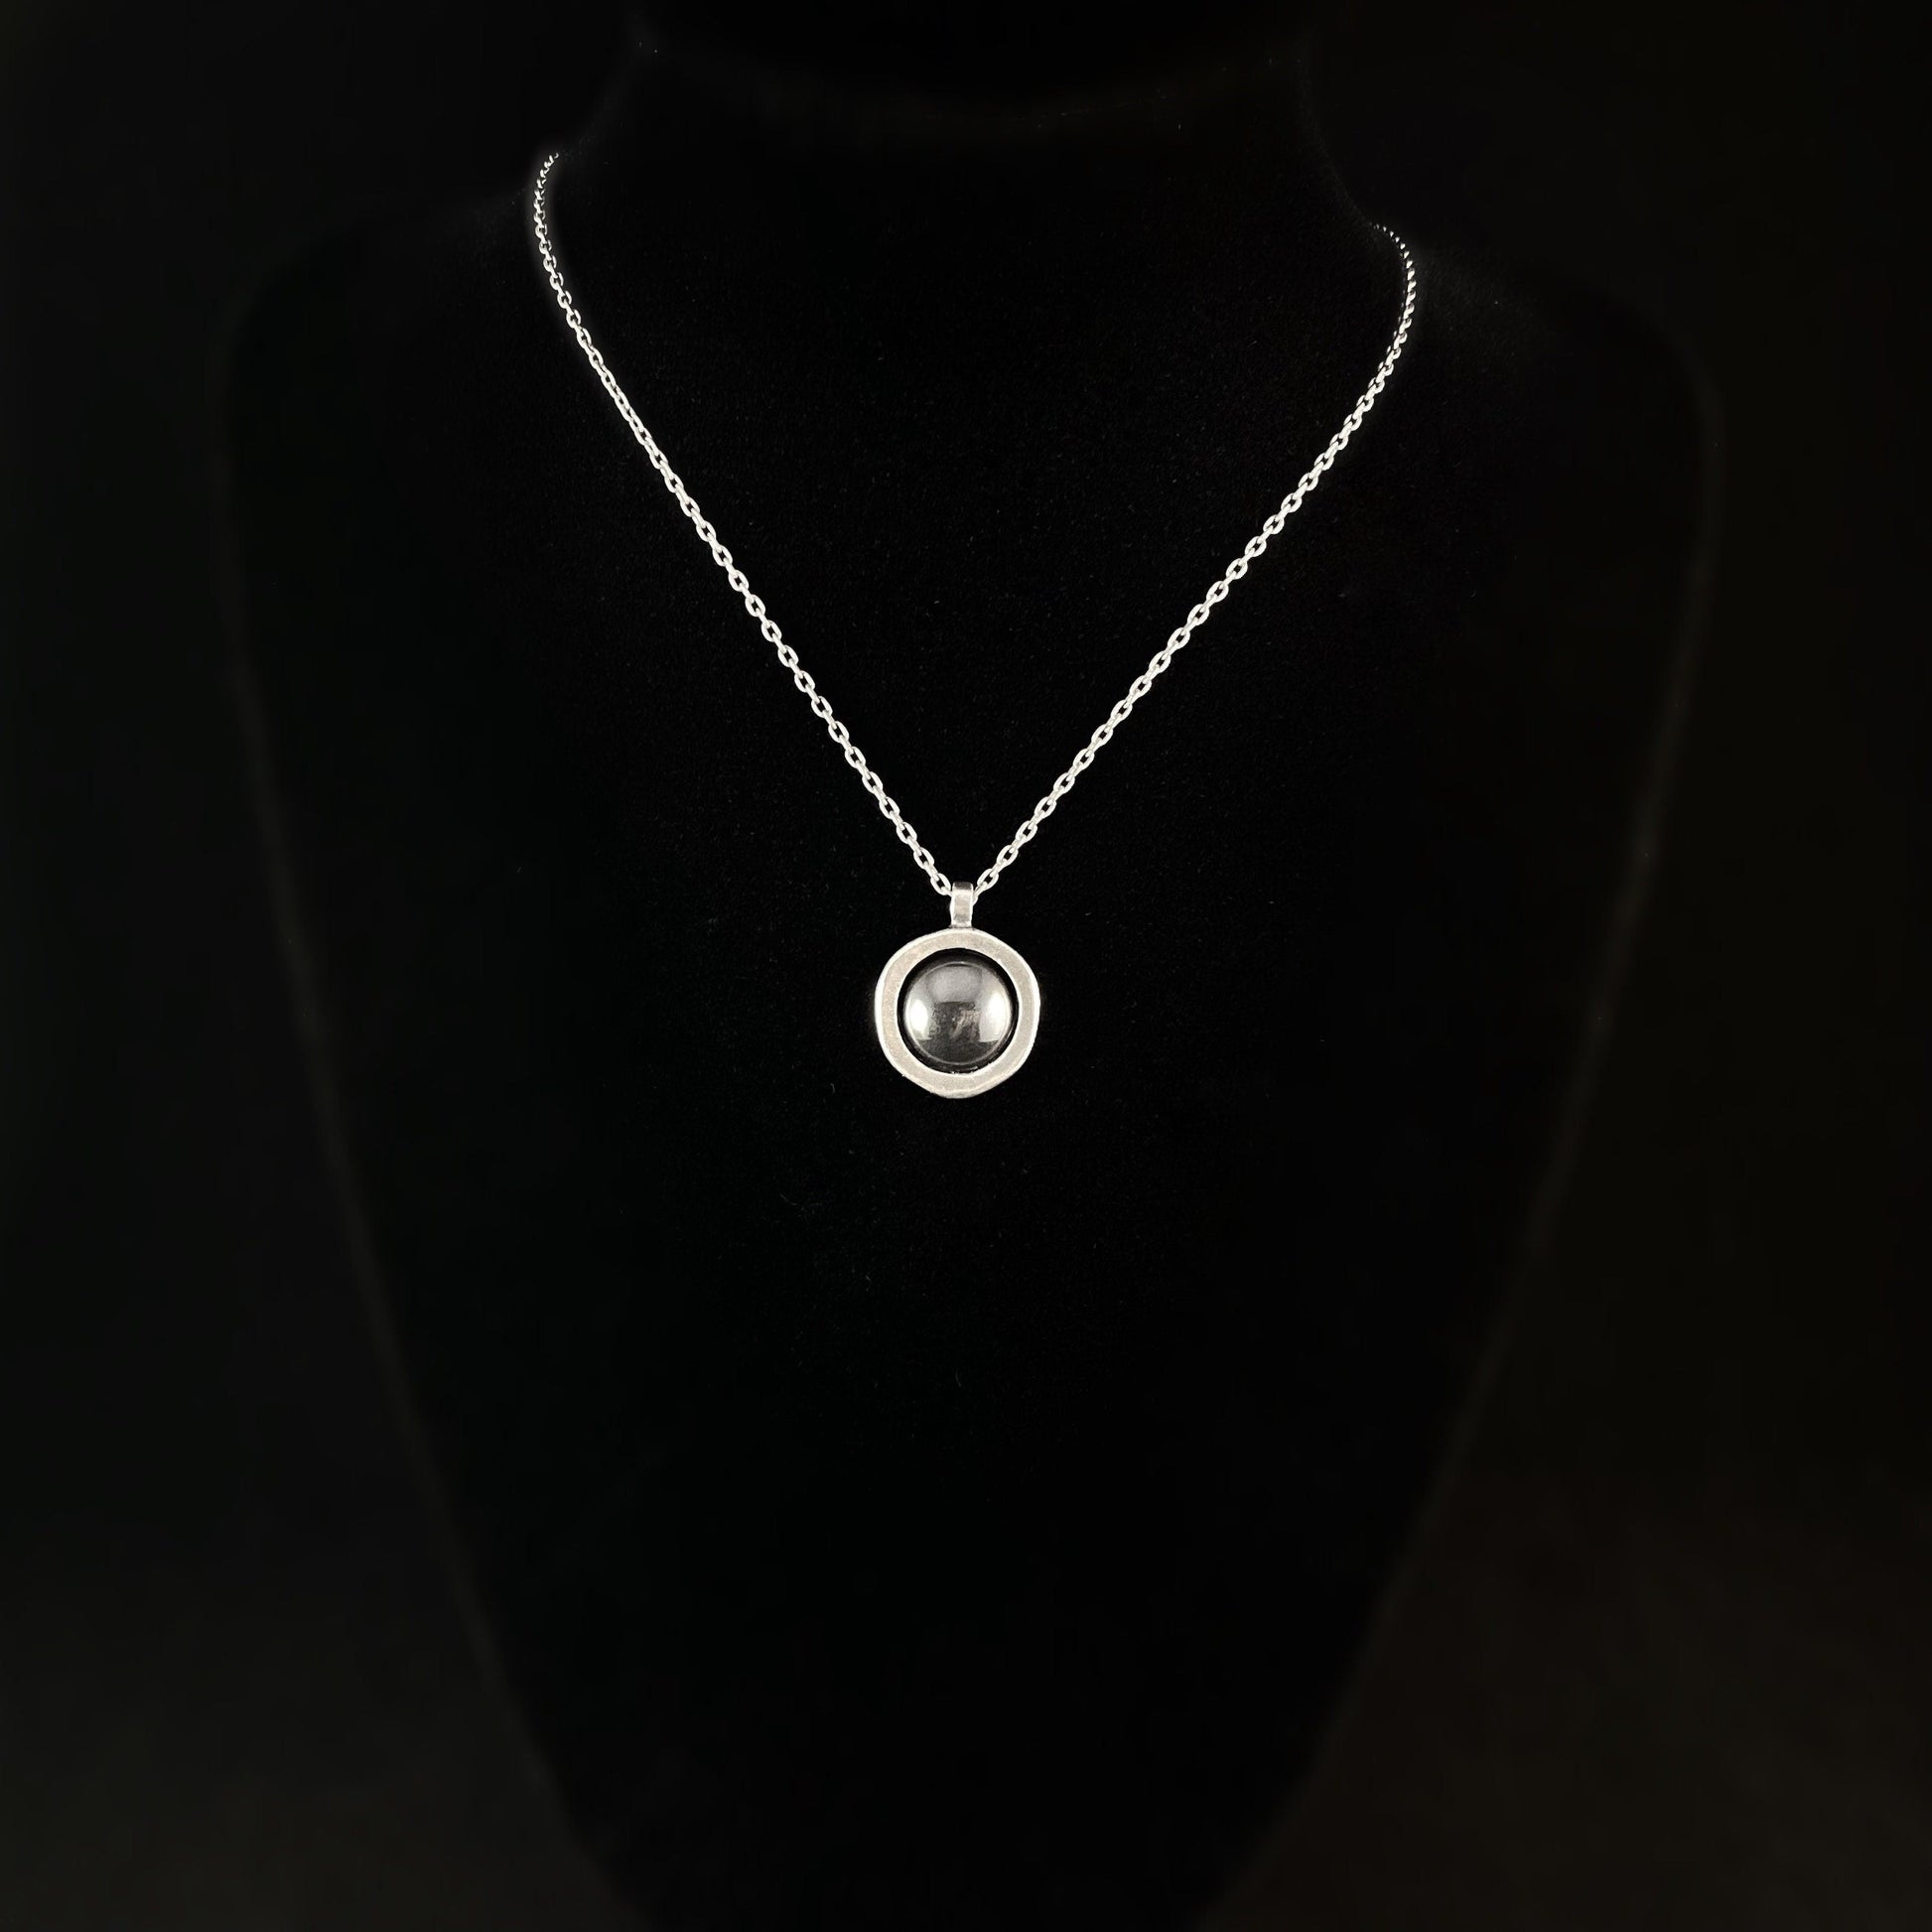 Handmade Silver Circle Pendant Necklace, Made in USA